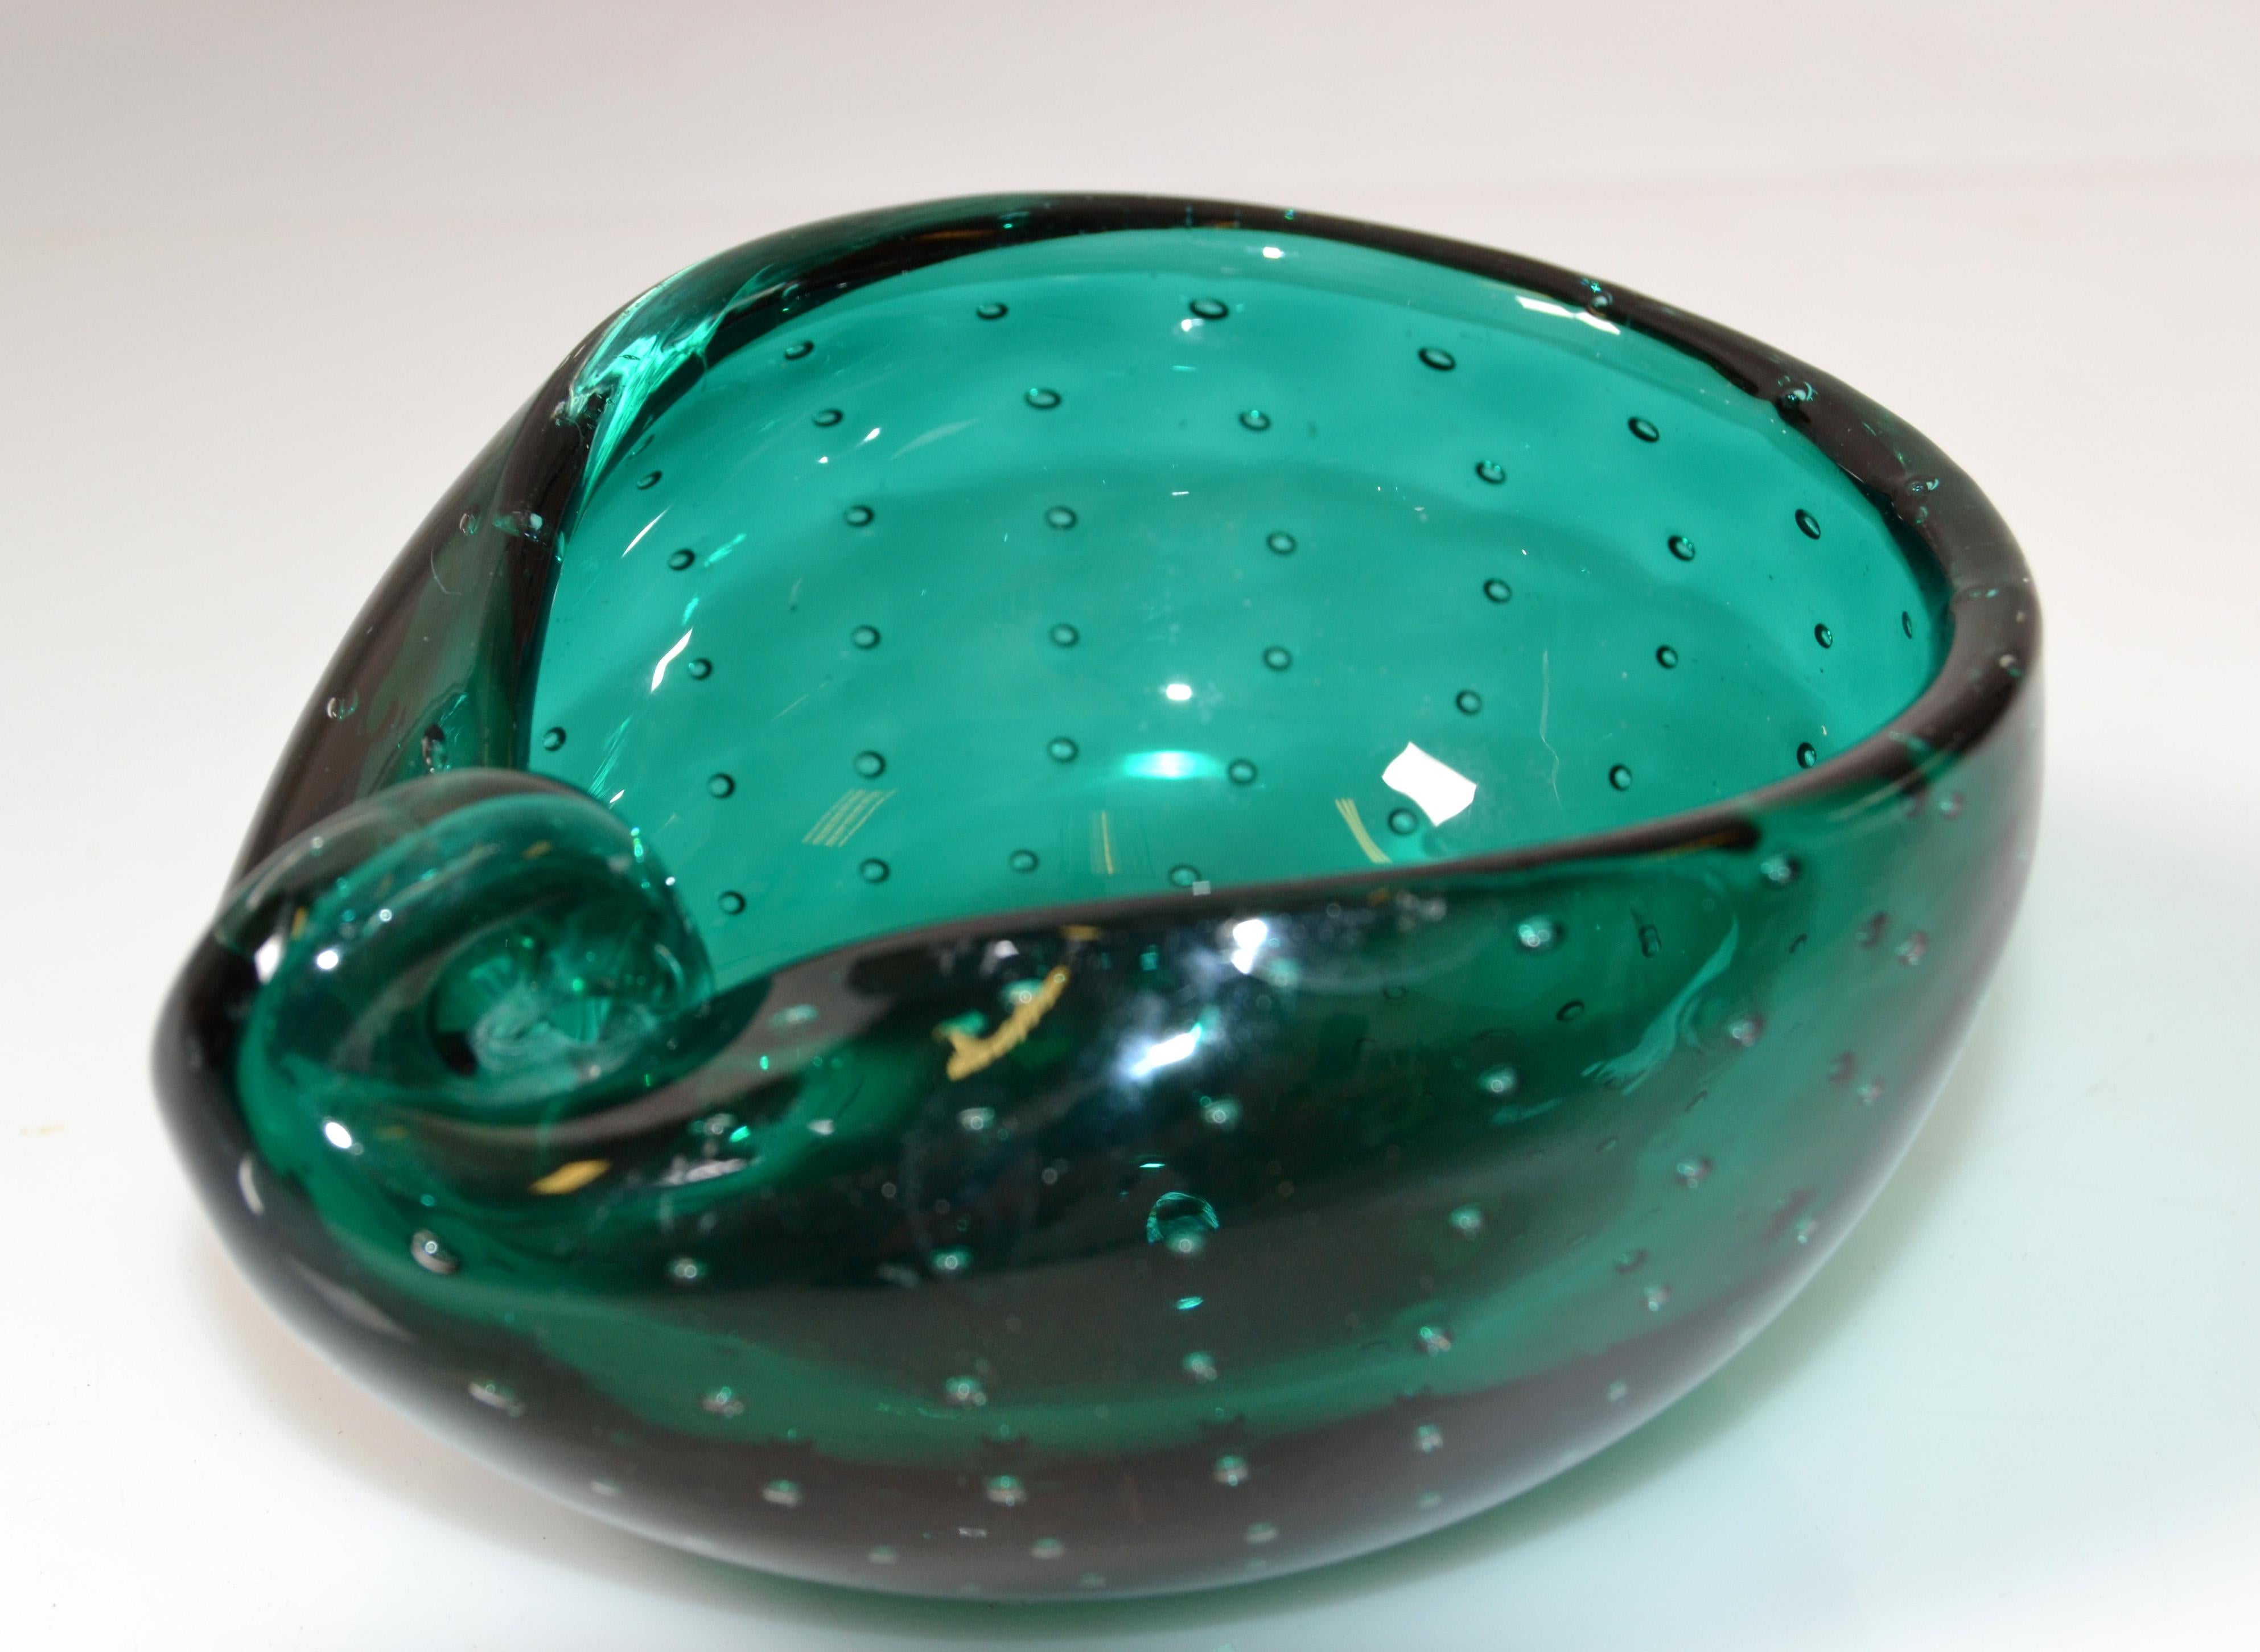 Italian Mid-Century Modern green bubble glass bowl, catchall or ashtray that is in oval form.
Made in the late 20th century.
Simply beautiful.